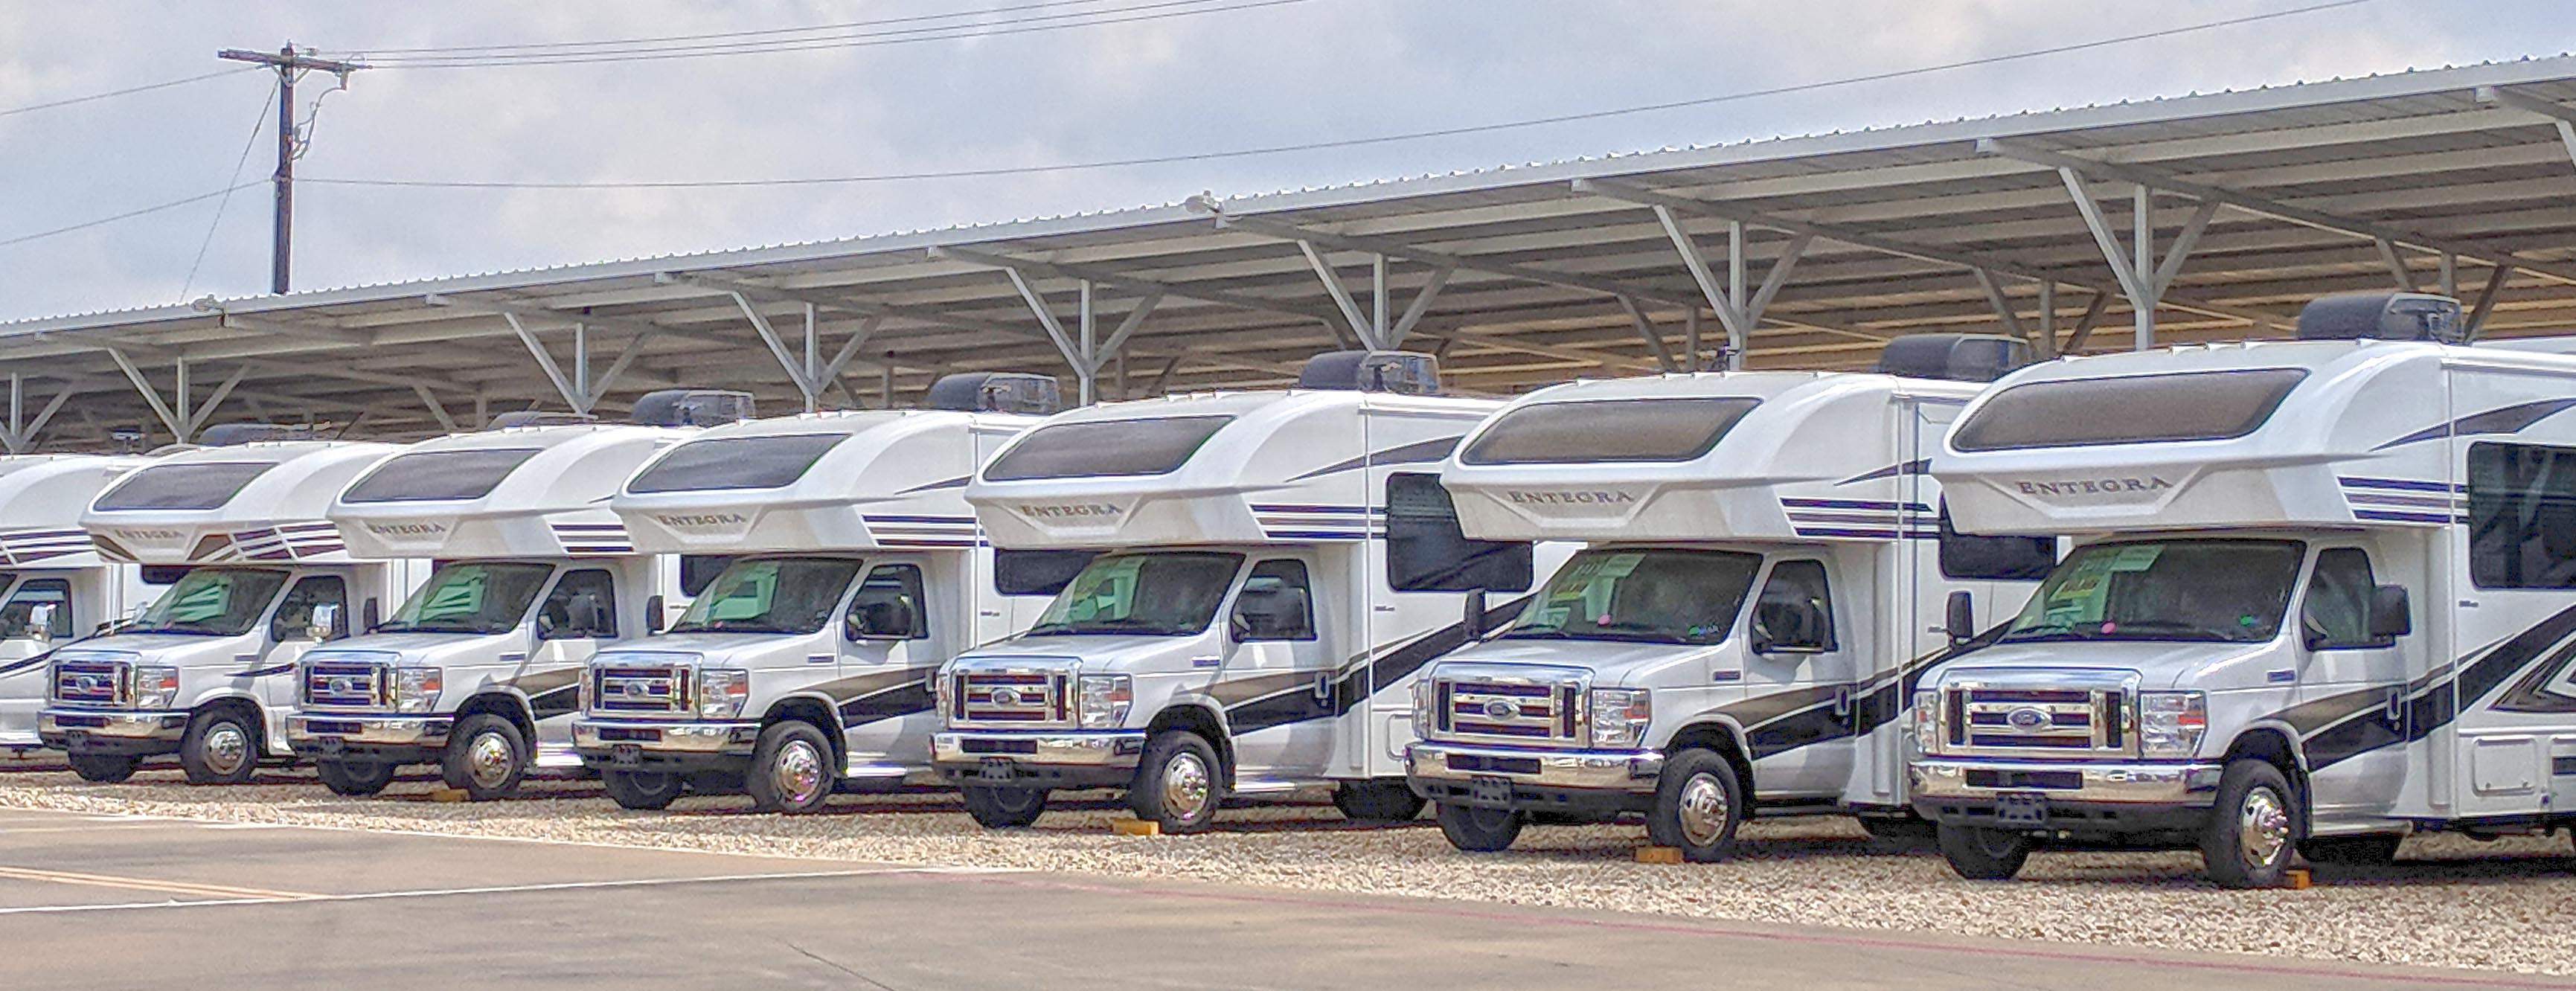 3 Best RV Shows in the US